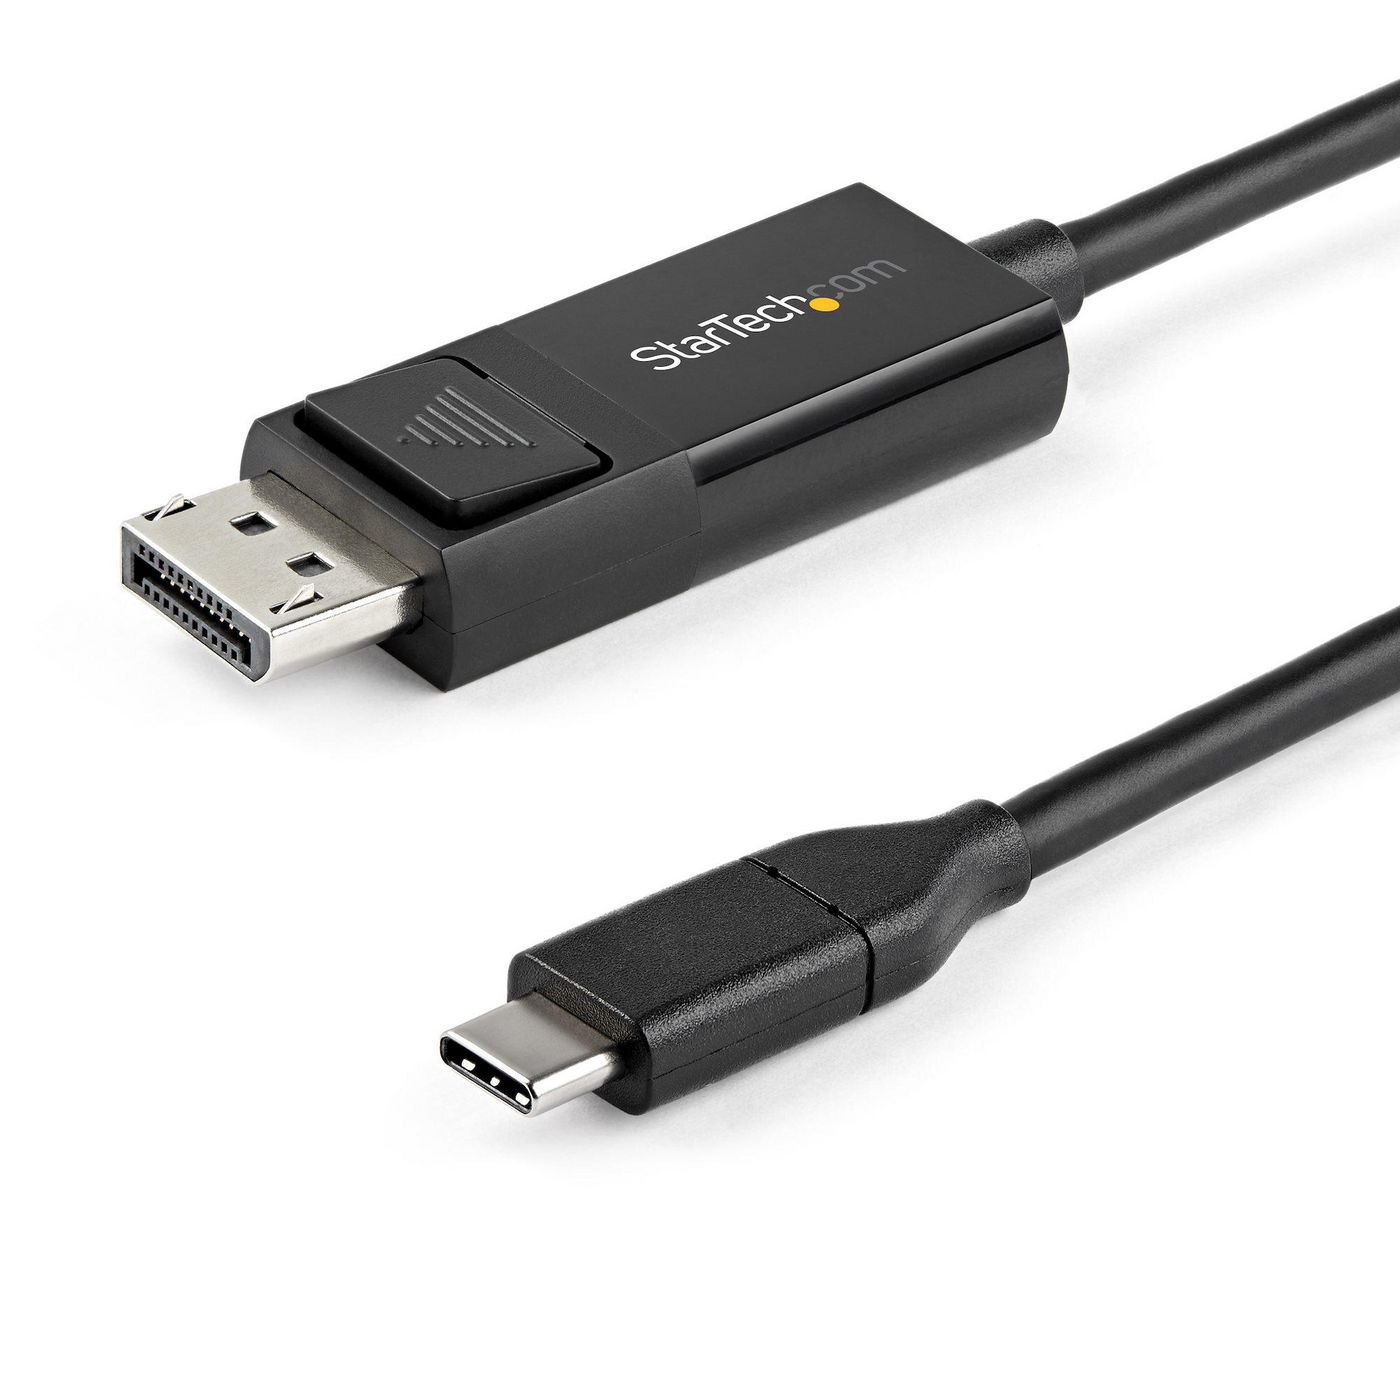 STARTECH.COM 6.6 FT. USB C TO DP 1.2 CABLE